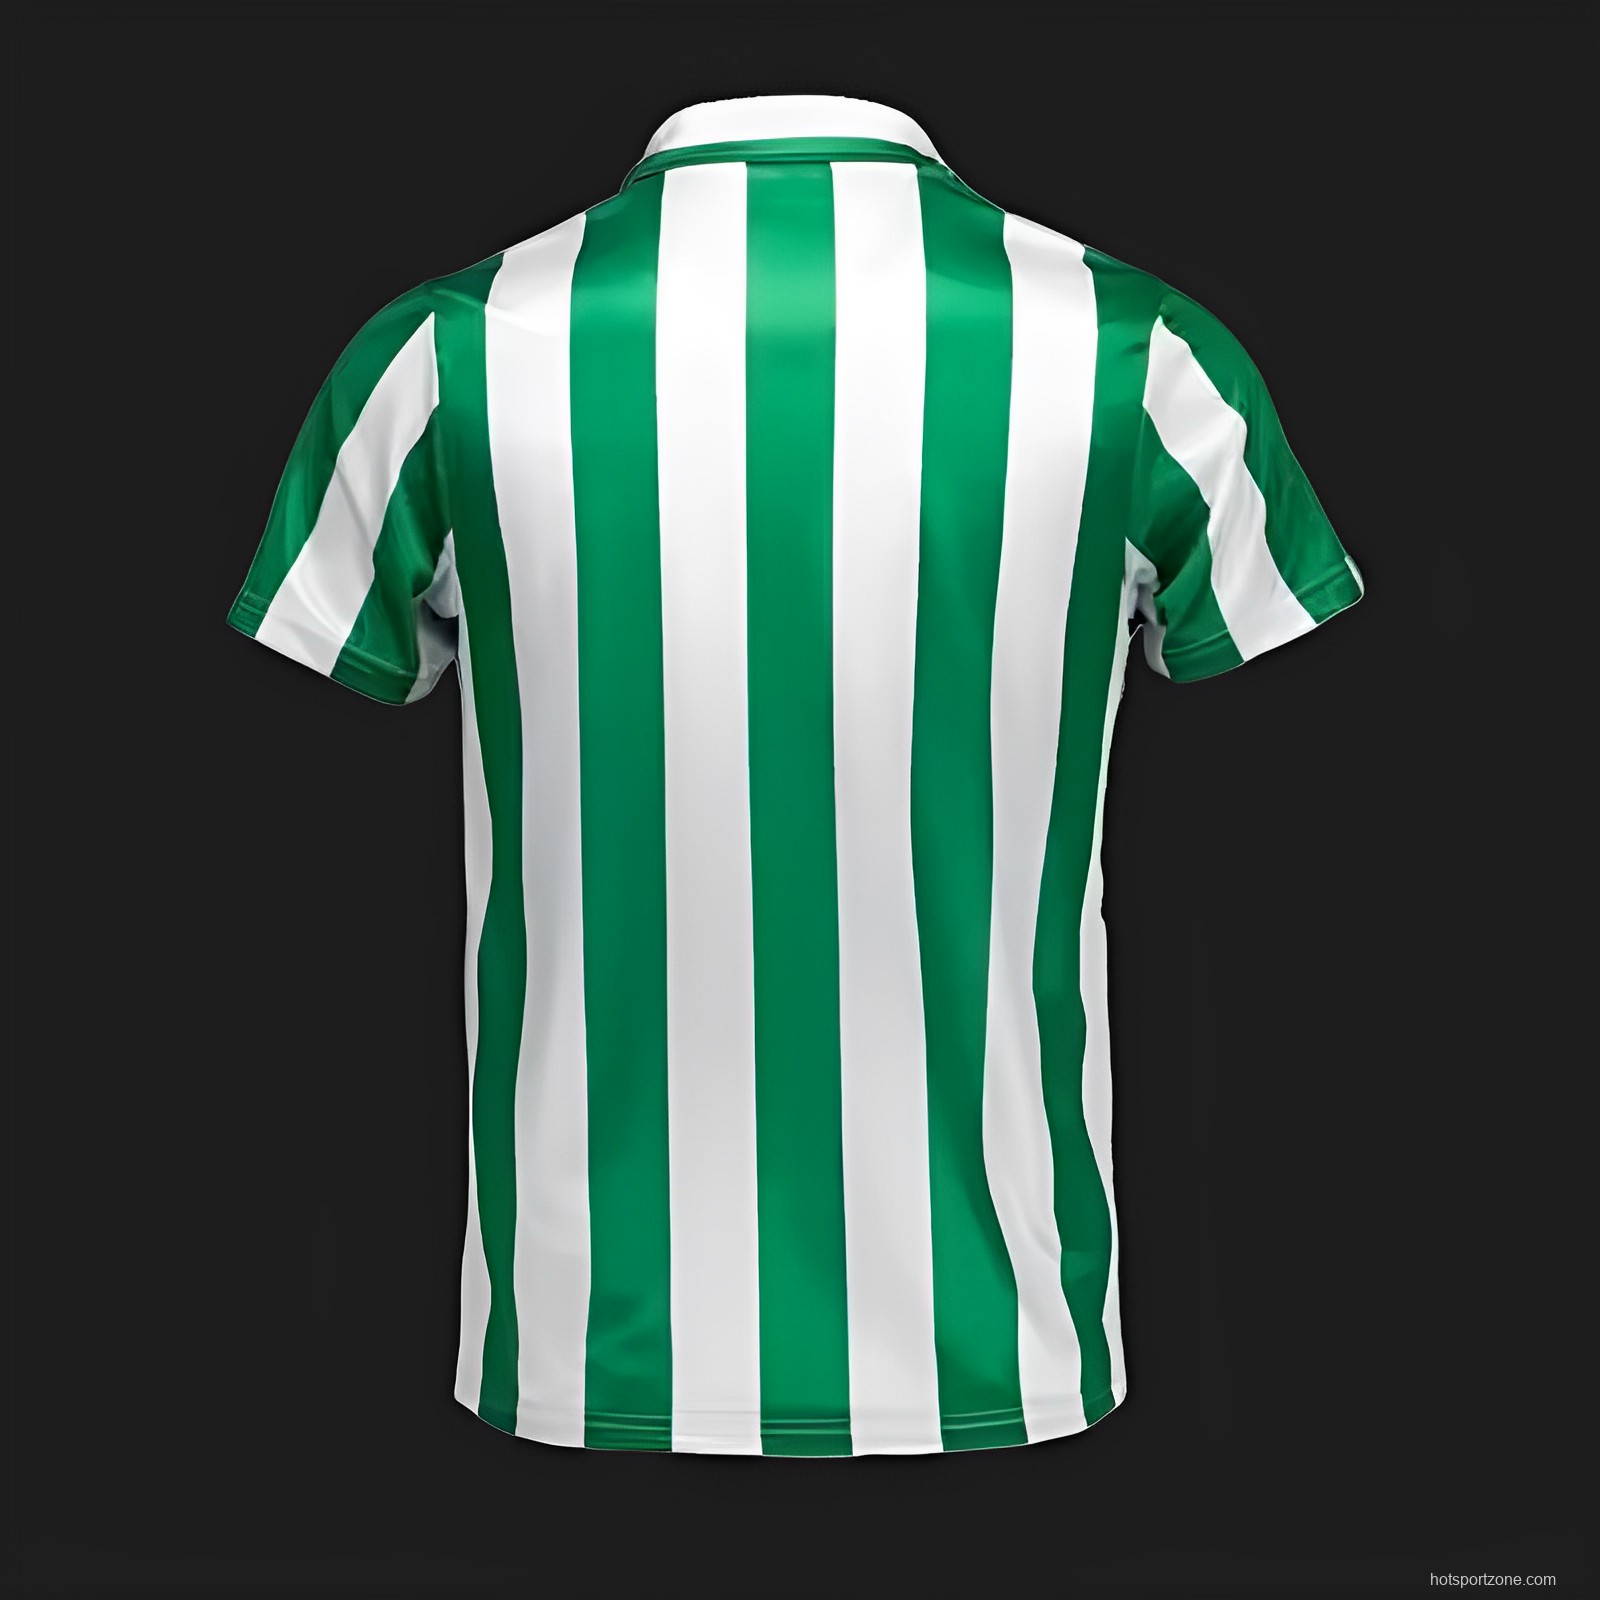 Retro 88/89 Real Betis Home Jersey